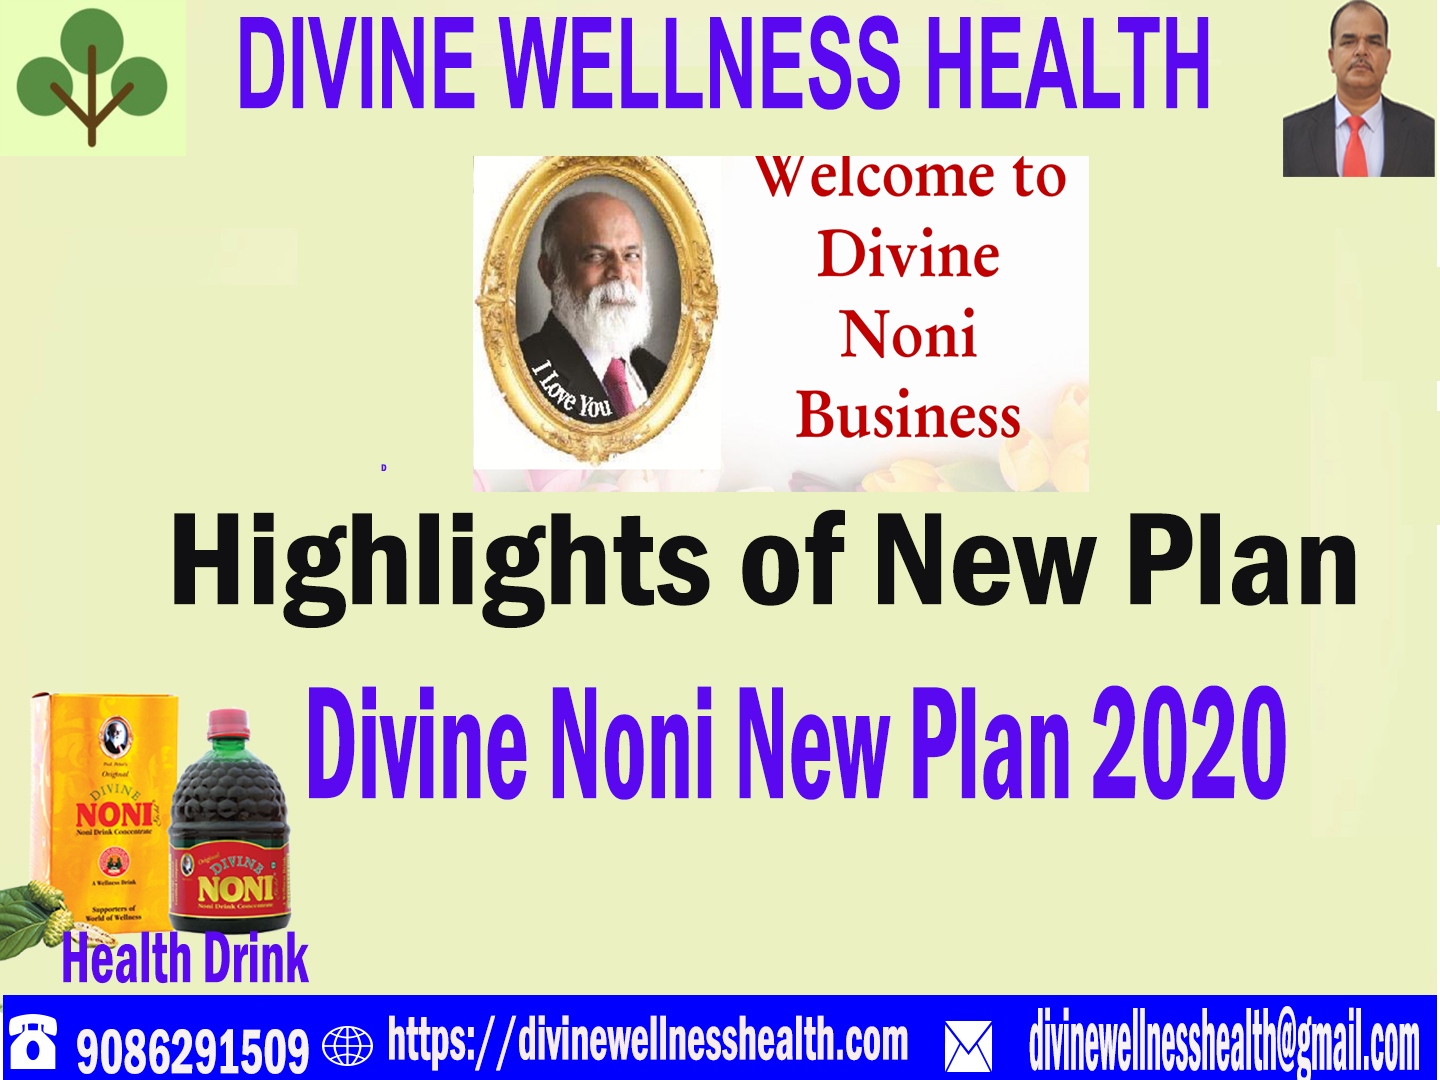 Highlights of Divine Noni New Plan